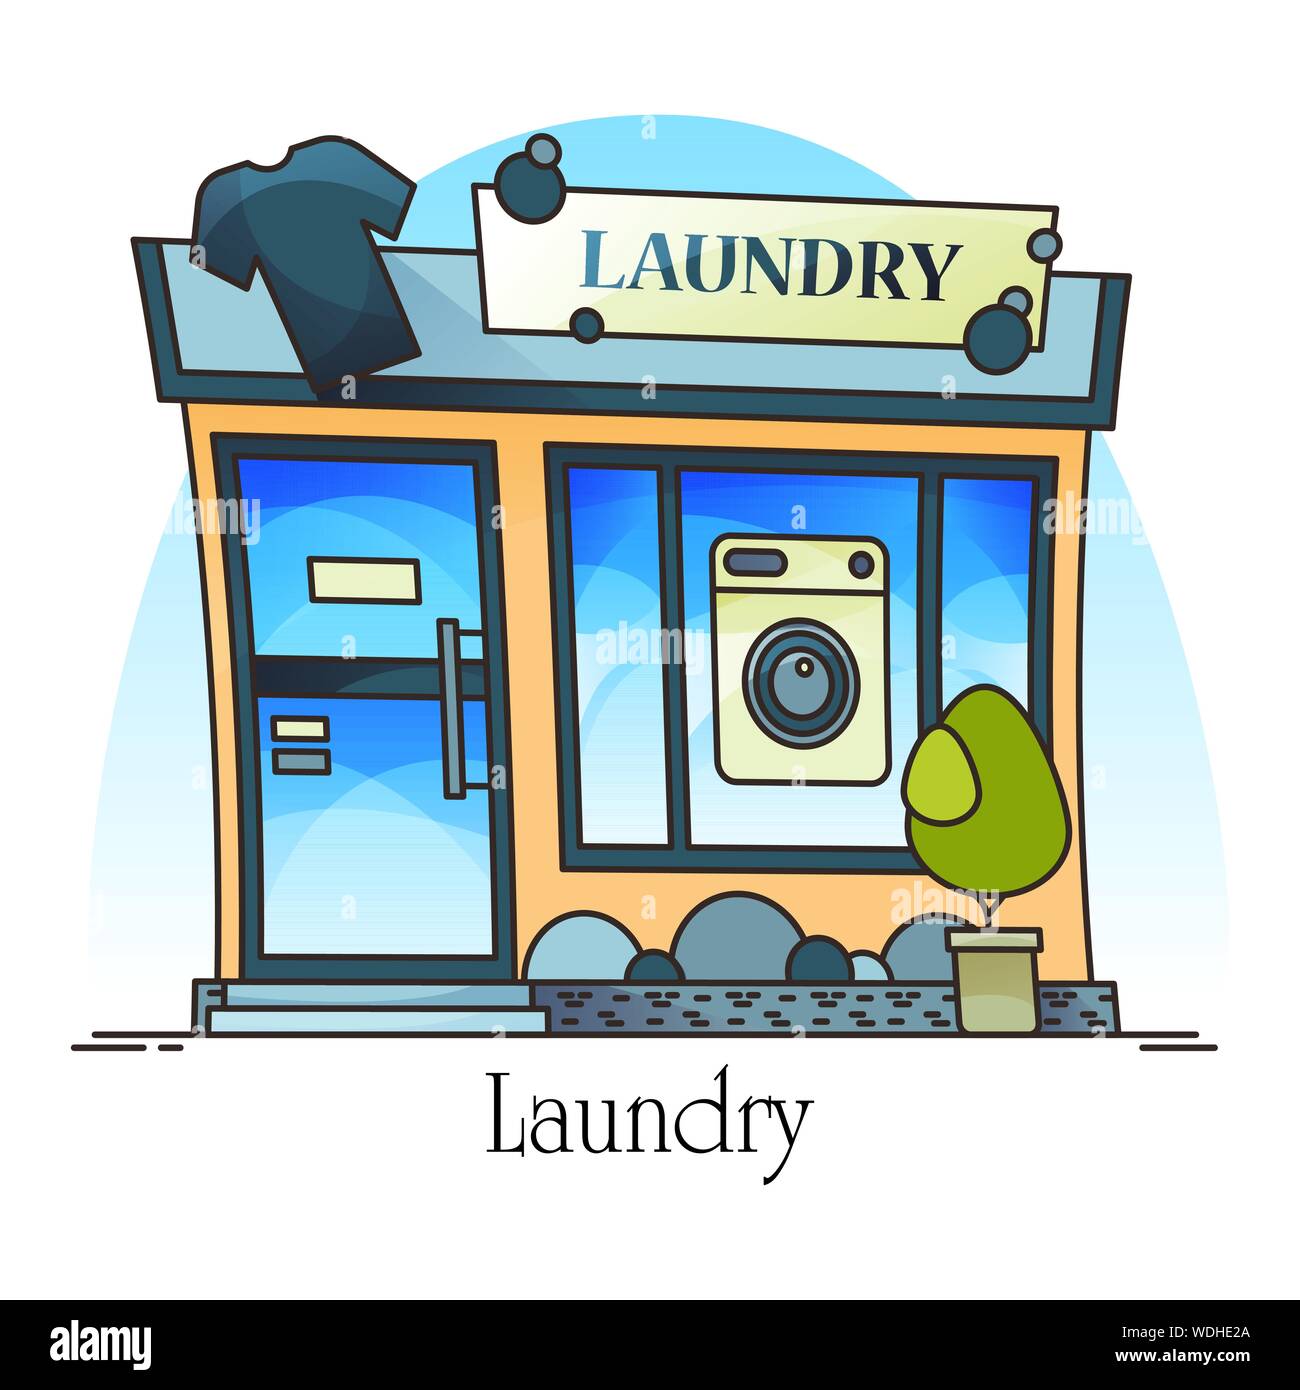 Laundry building with t-shirt and washing machine Stock Vector